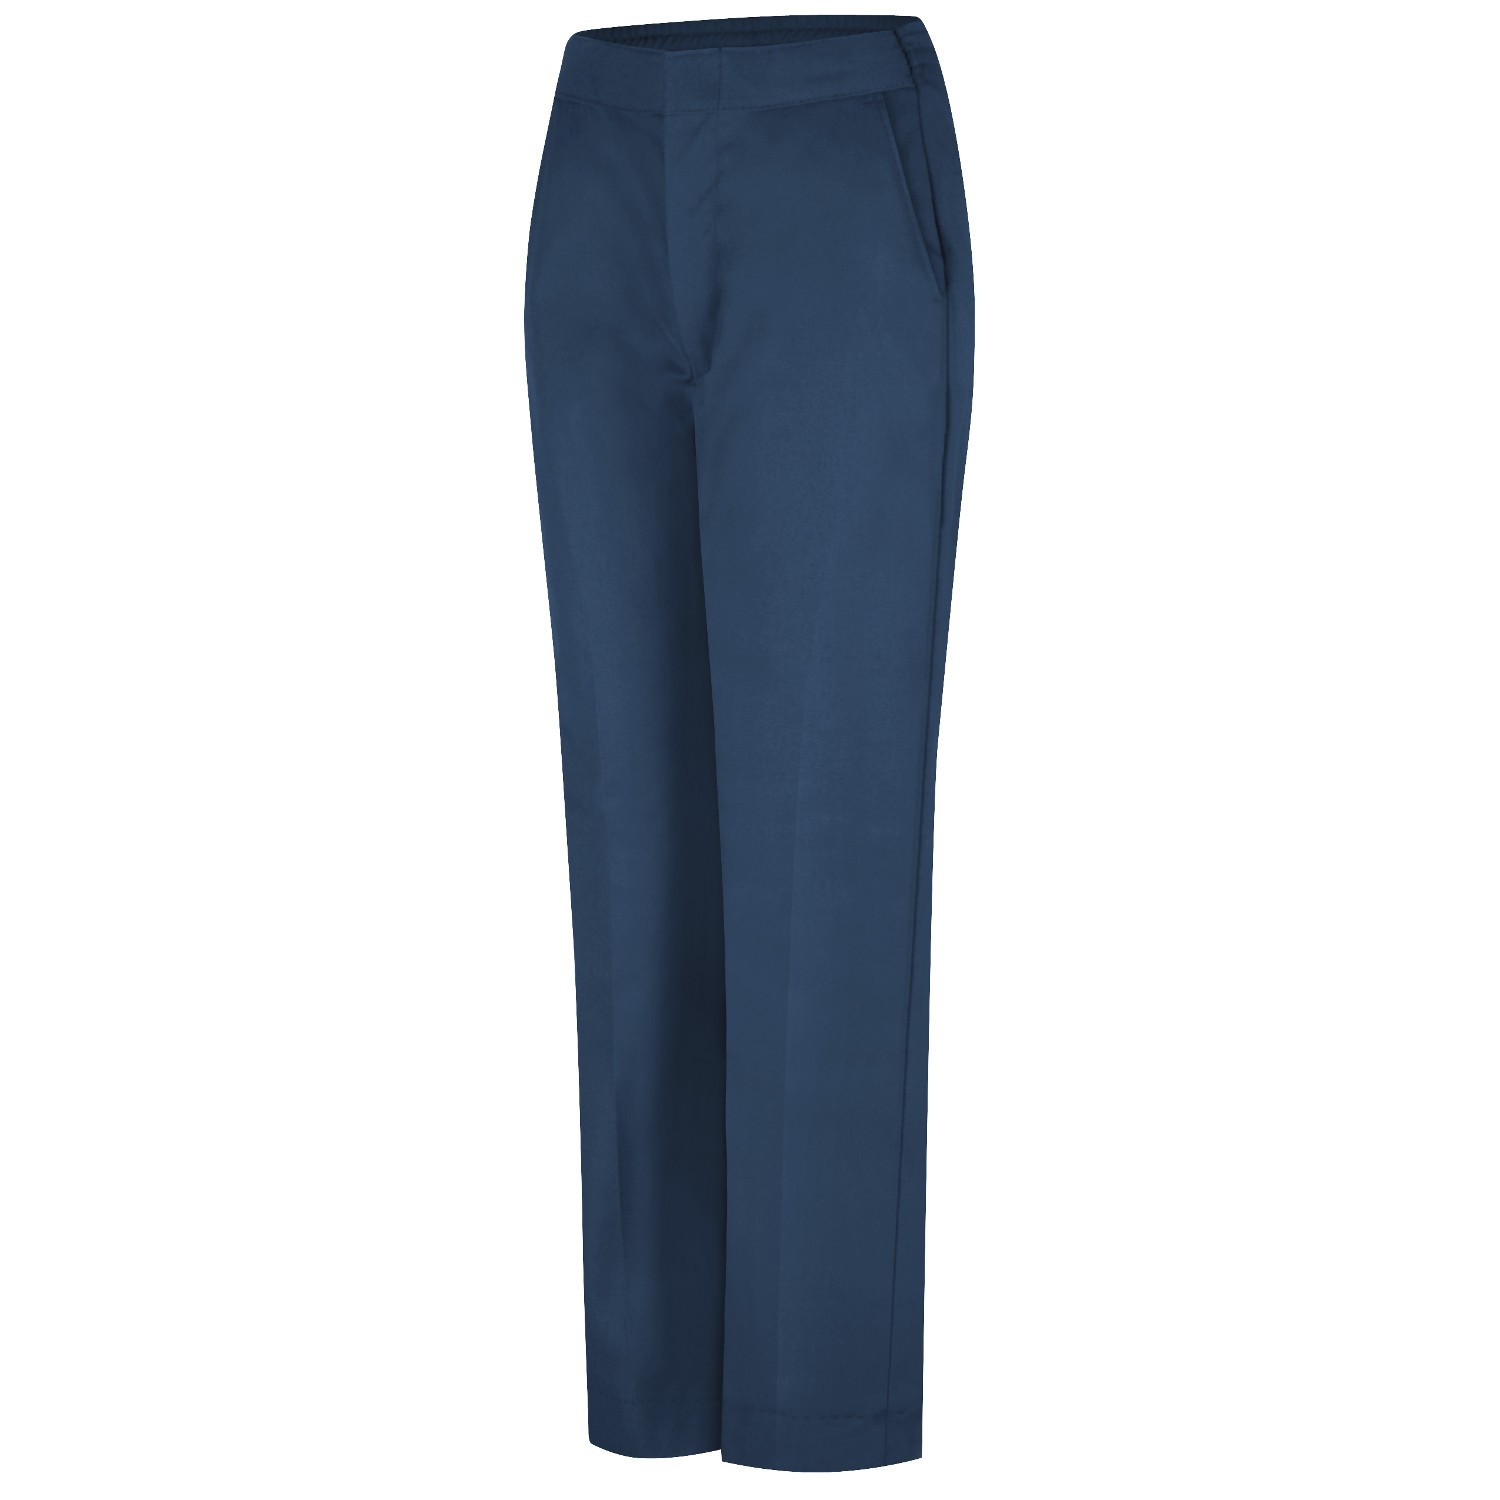 Ladies Flat Front Poly/Cotton Work Pants In Navy Blue Available In